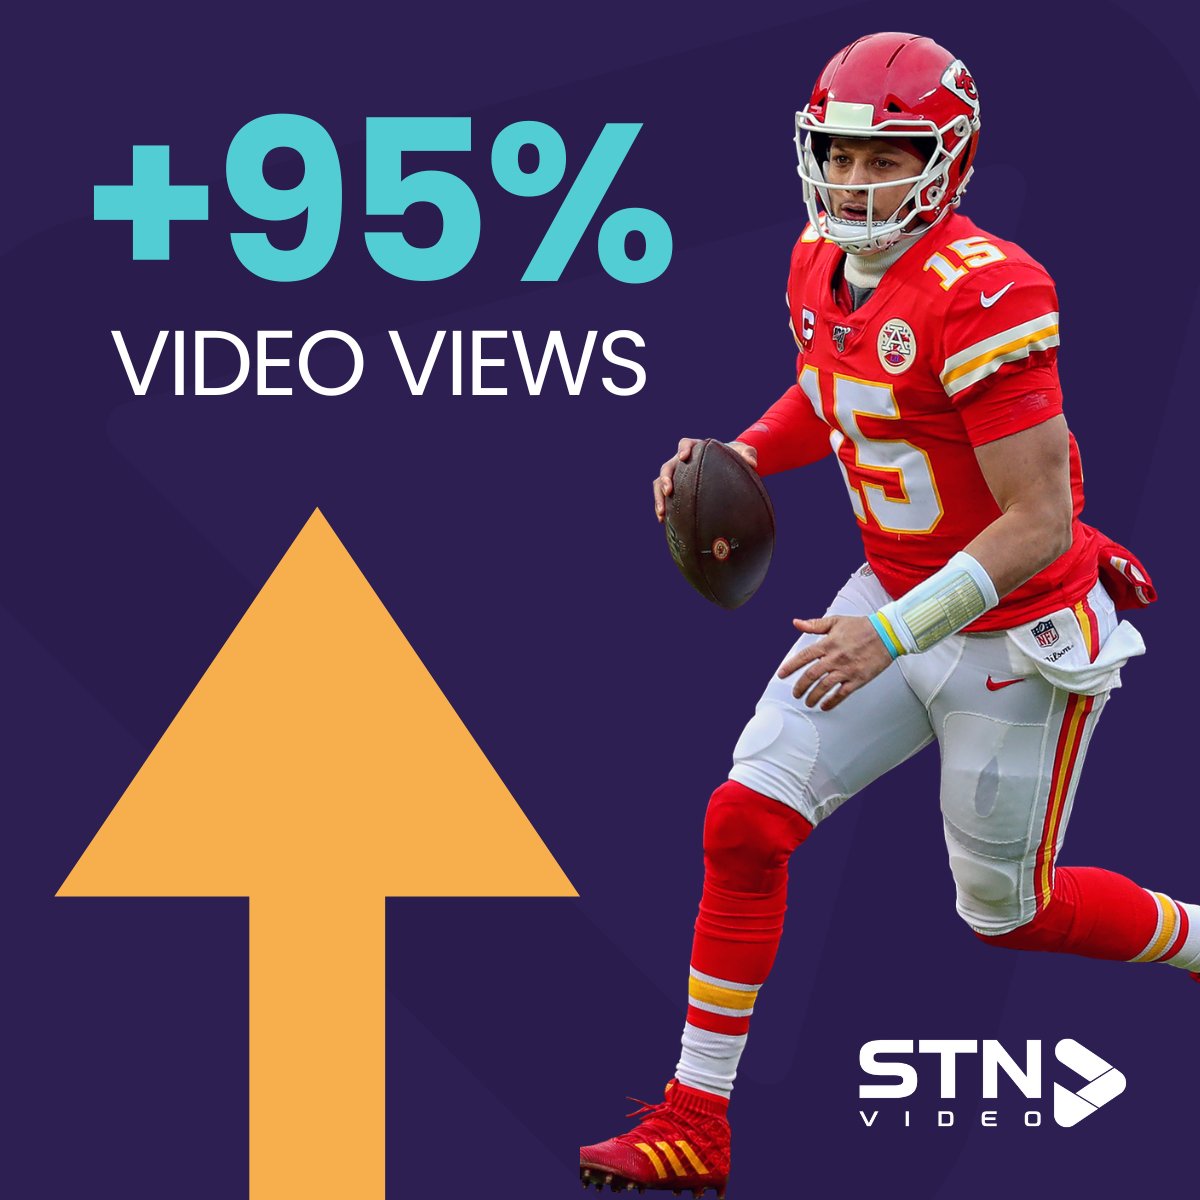 During @nfl Kick Off last week STN helped our publishing partners deliver 95% MORE video views to their users than 2022! Want to make sure your site is packed with official highlights from this weekend's games all at ZERO COST? DM us to find out how #onlinevideo